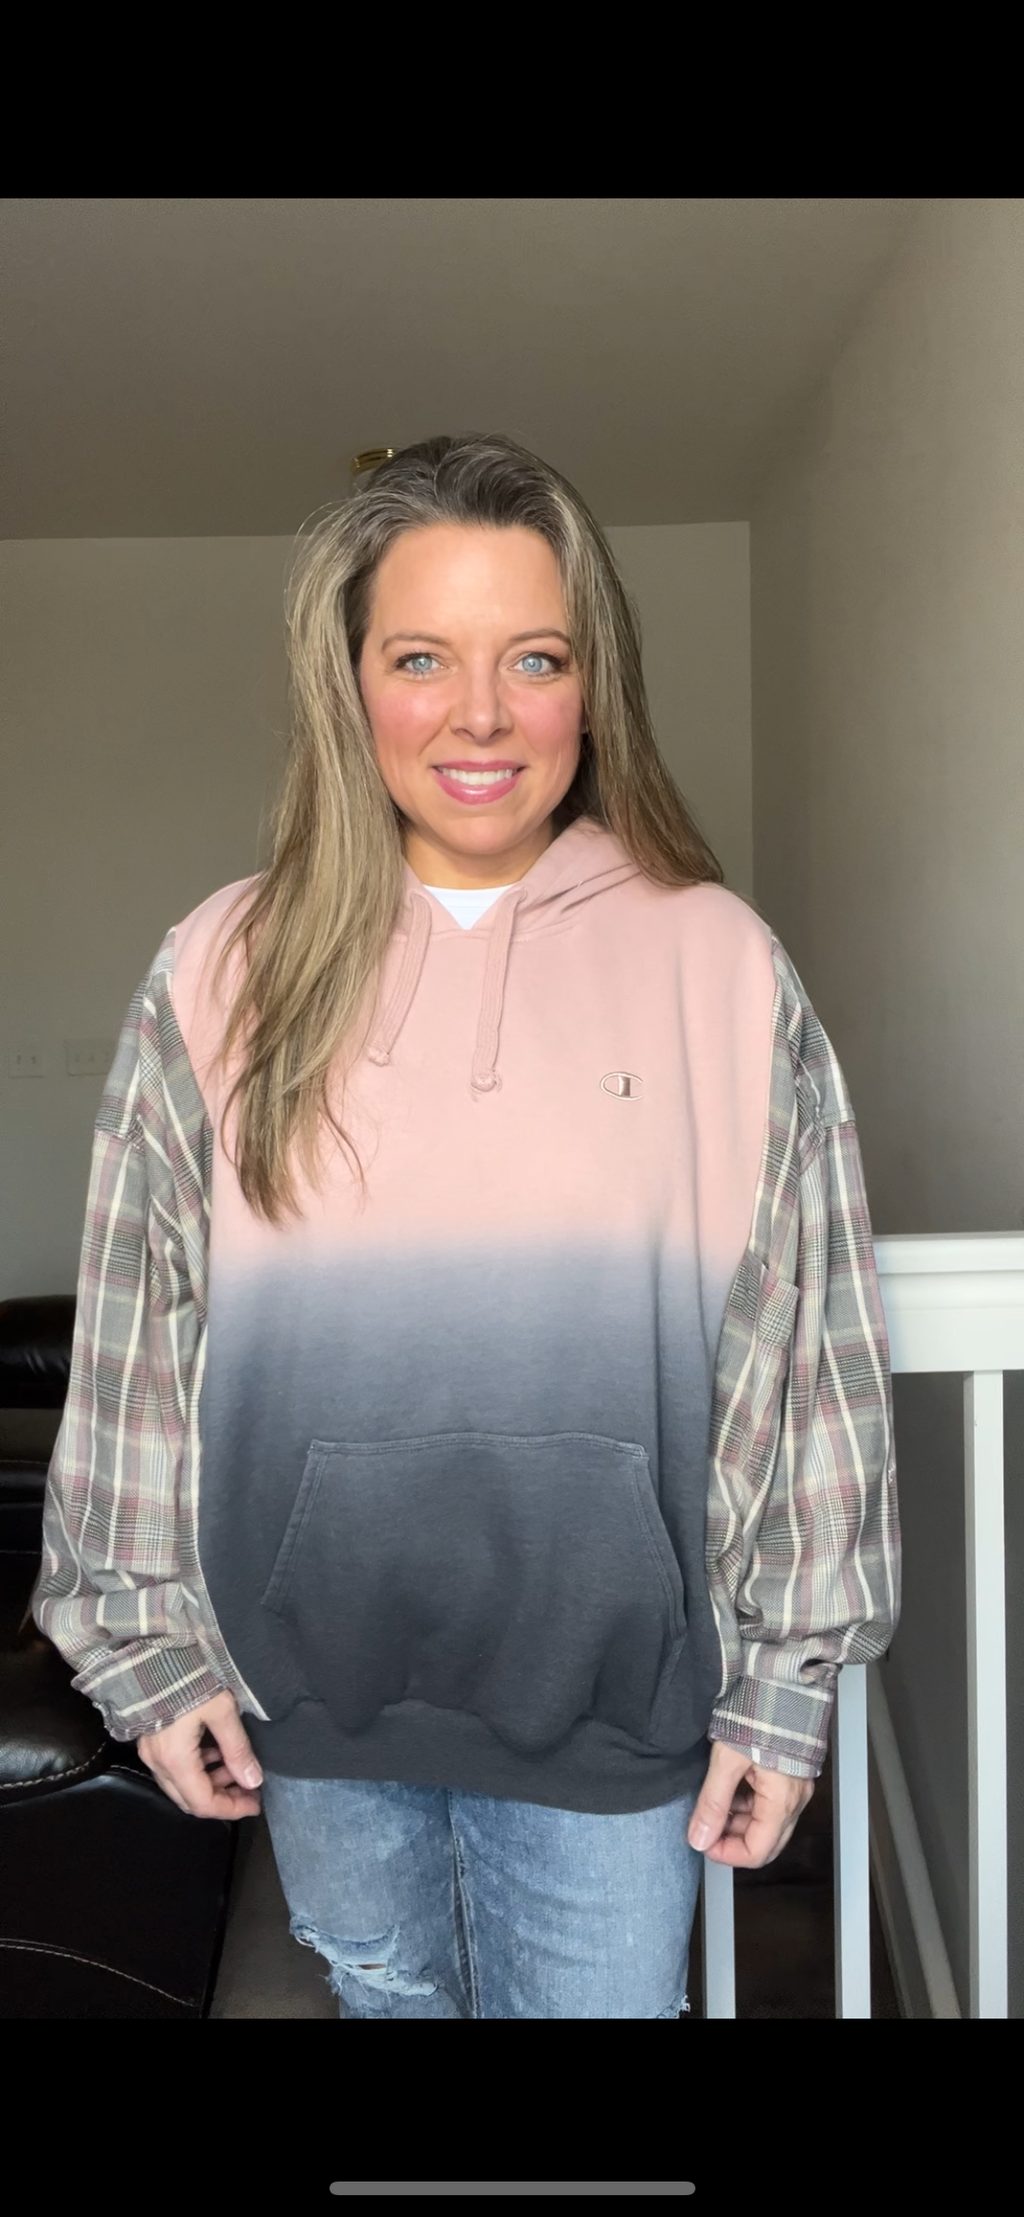 Upcycled Ombre Champion – women’s XL/1X – soft thick sweatshirt with flannel